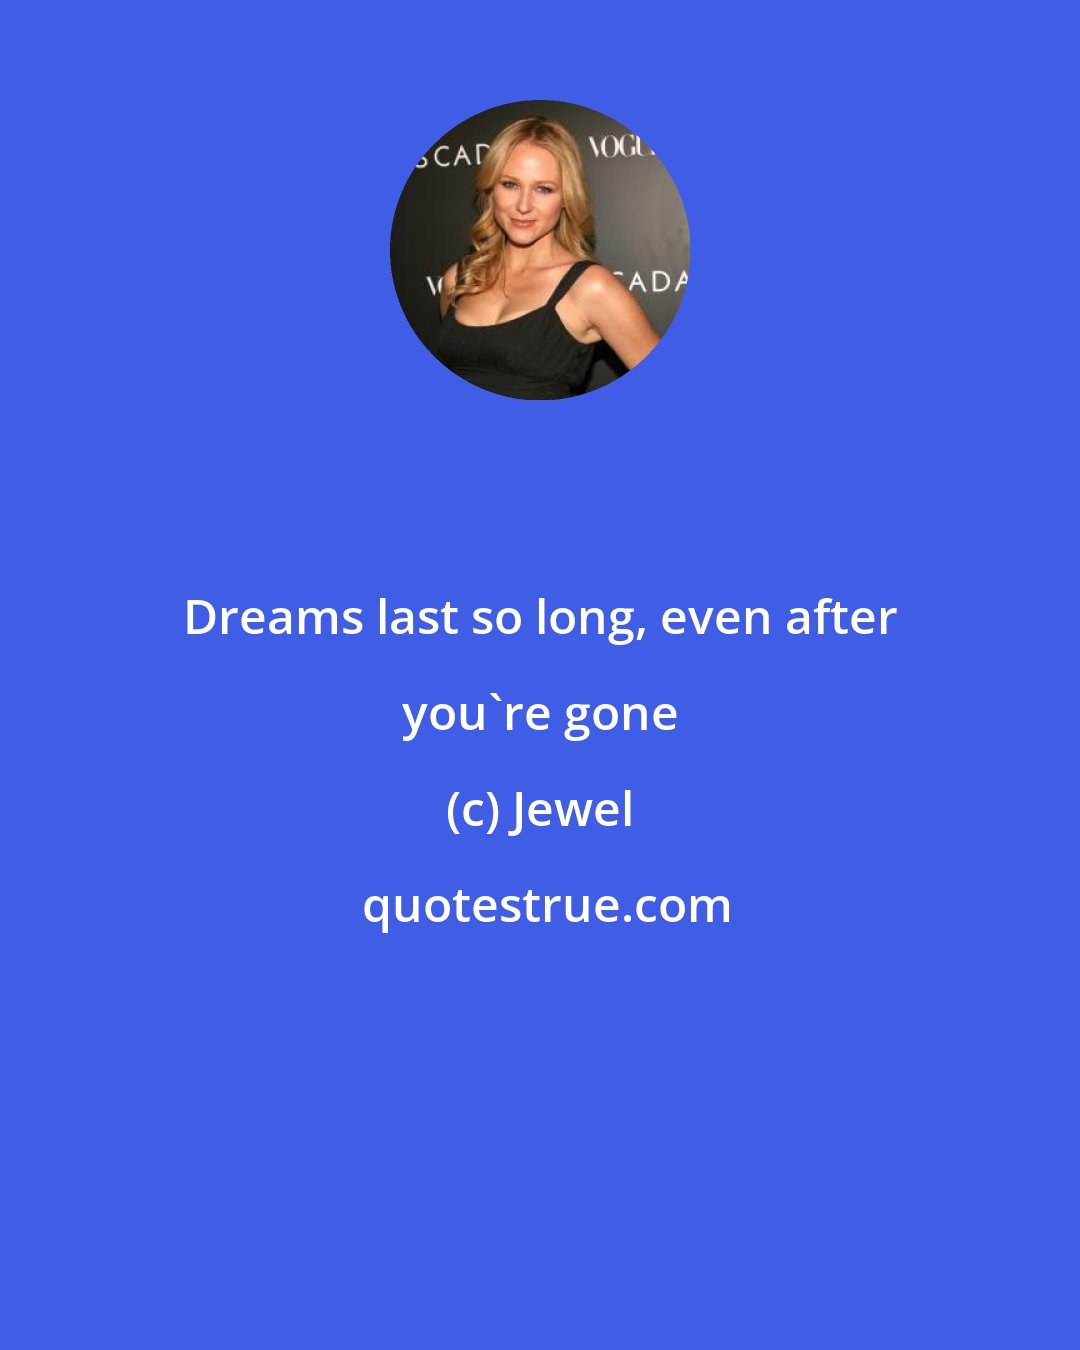 Jewel: Dreams last so long, even after you're gone